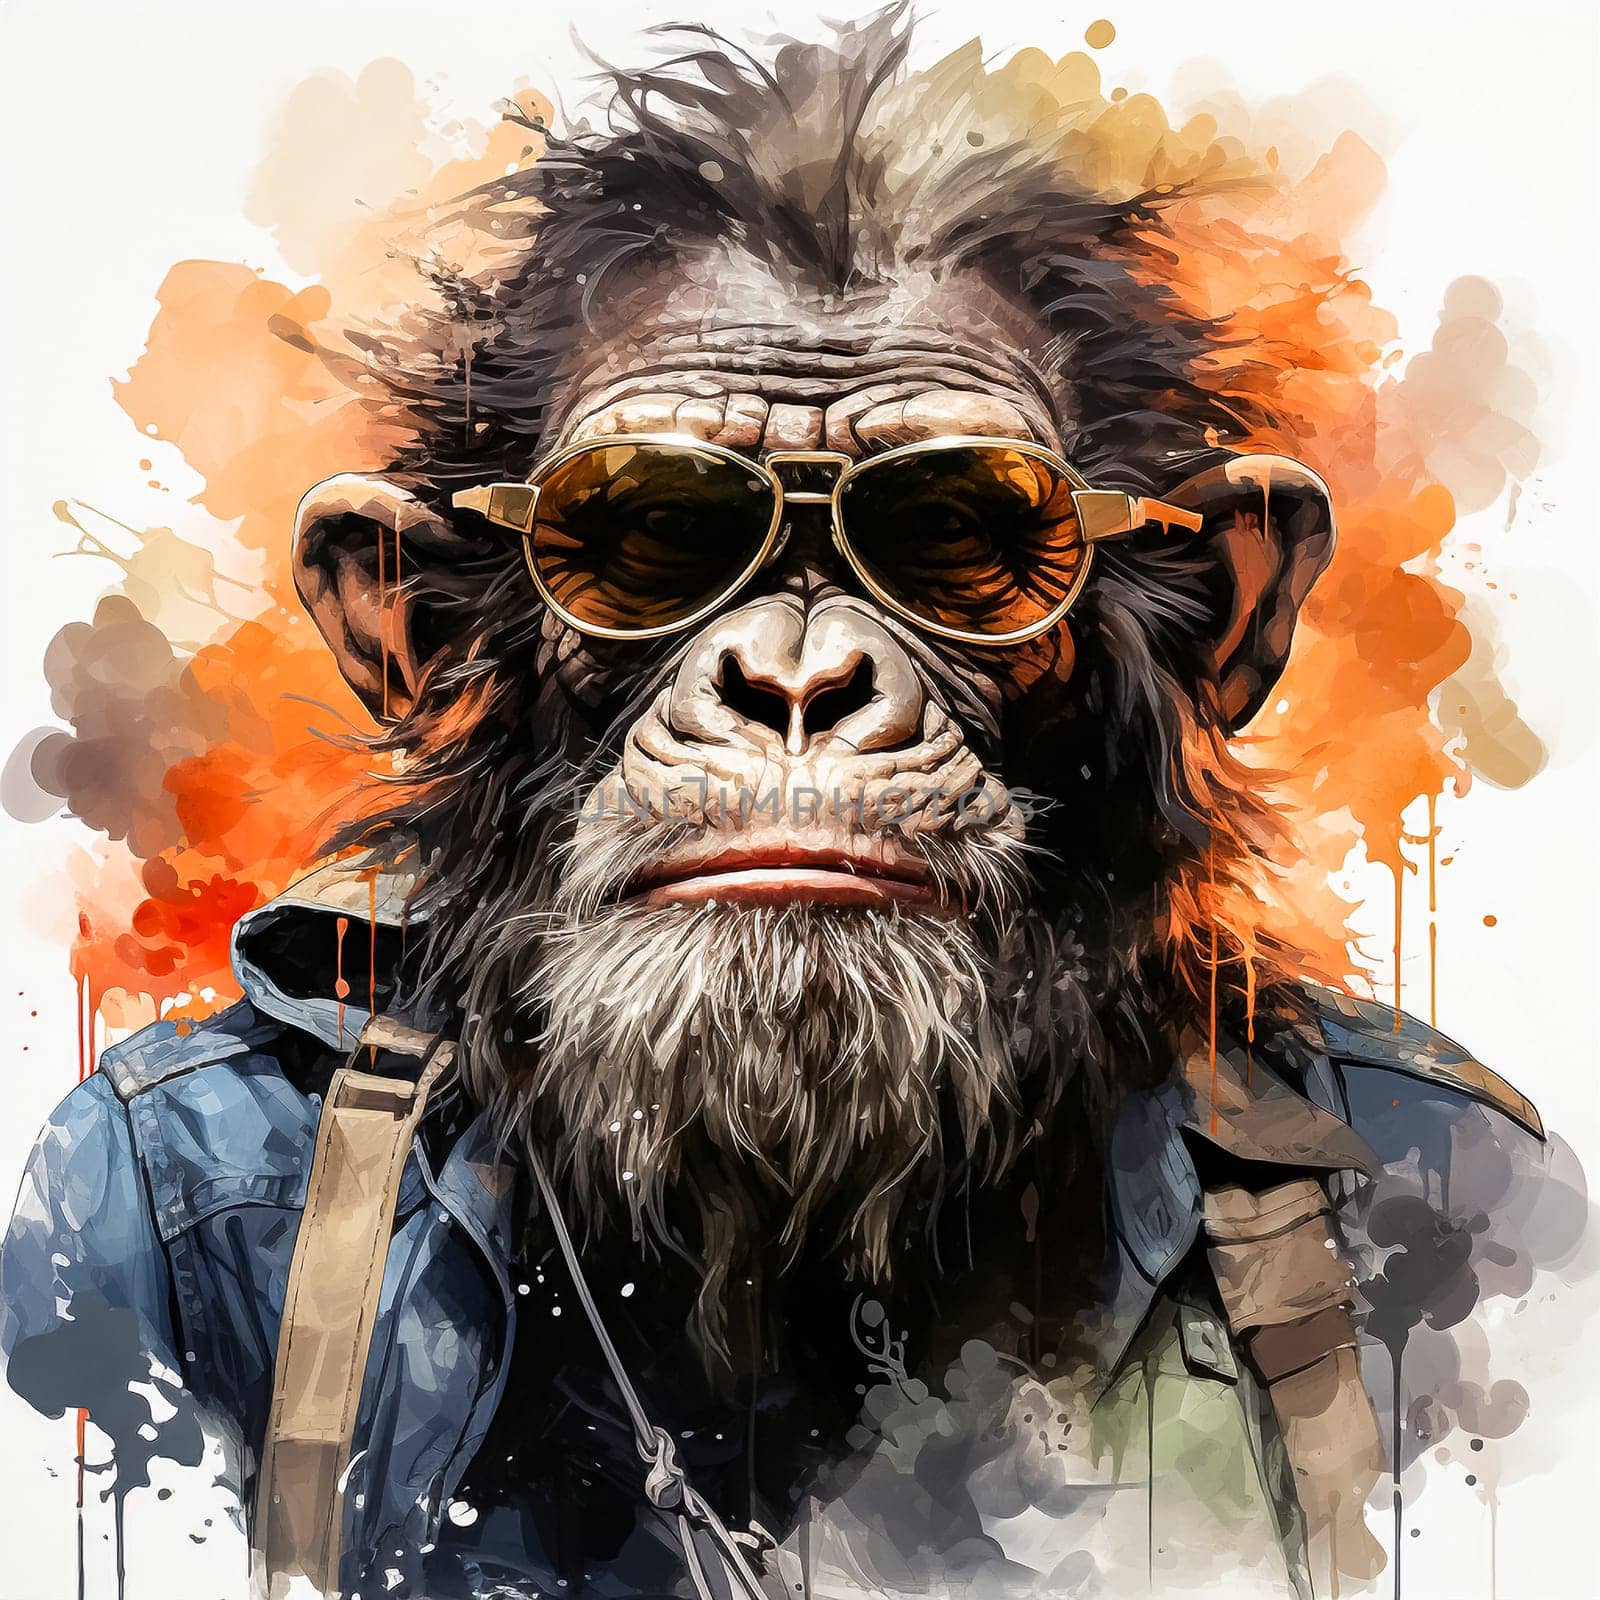 A business watercolor of a monkey in an elegant suit is a whimsical combination of the business world and natural charm, depicted with artistic flair.